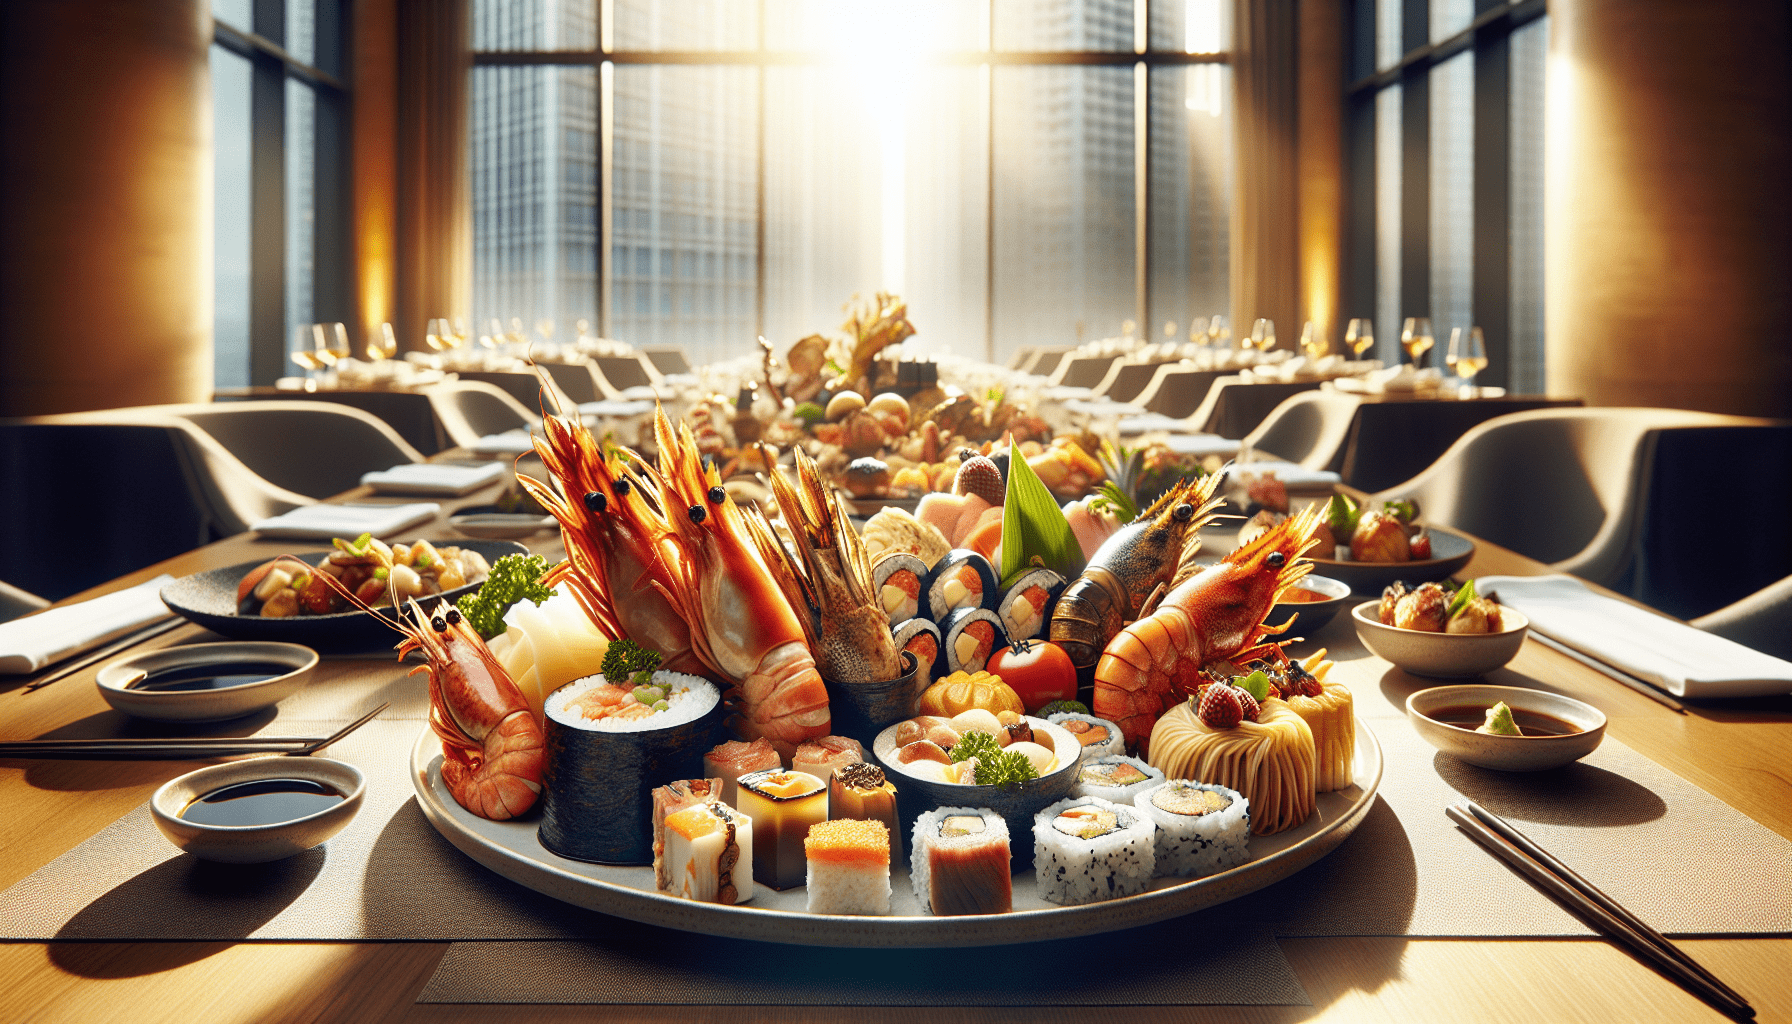 What Are The Top-rated Buffets For Gourmet Dining Experiences In Las Vegas?